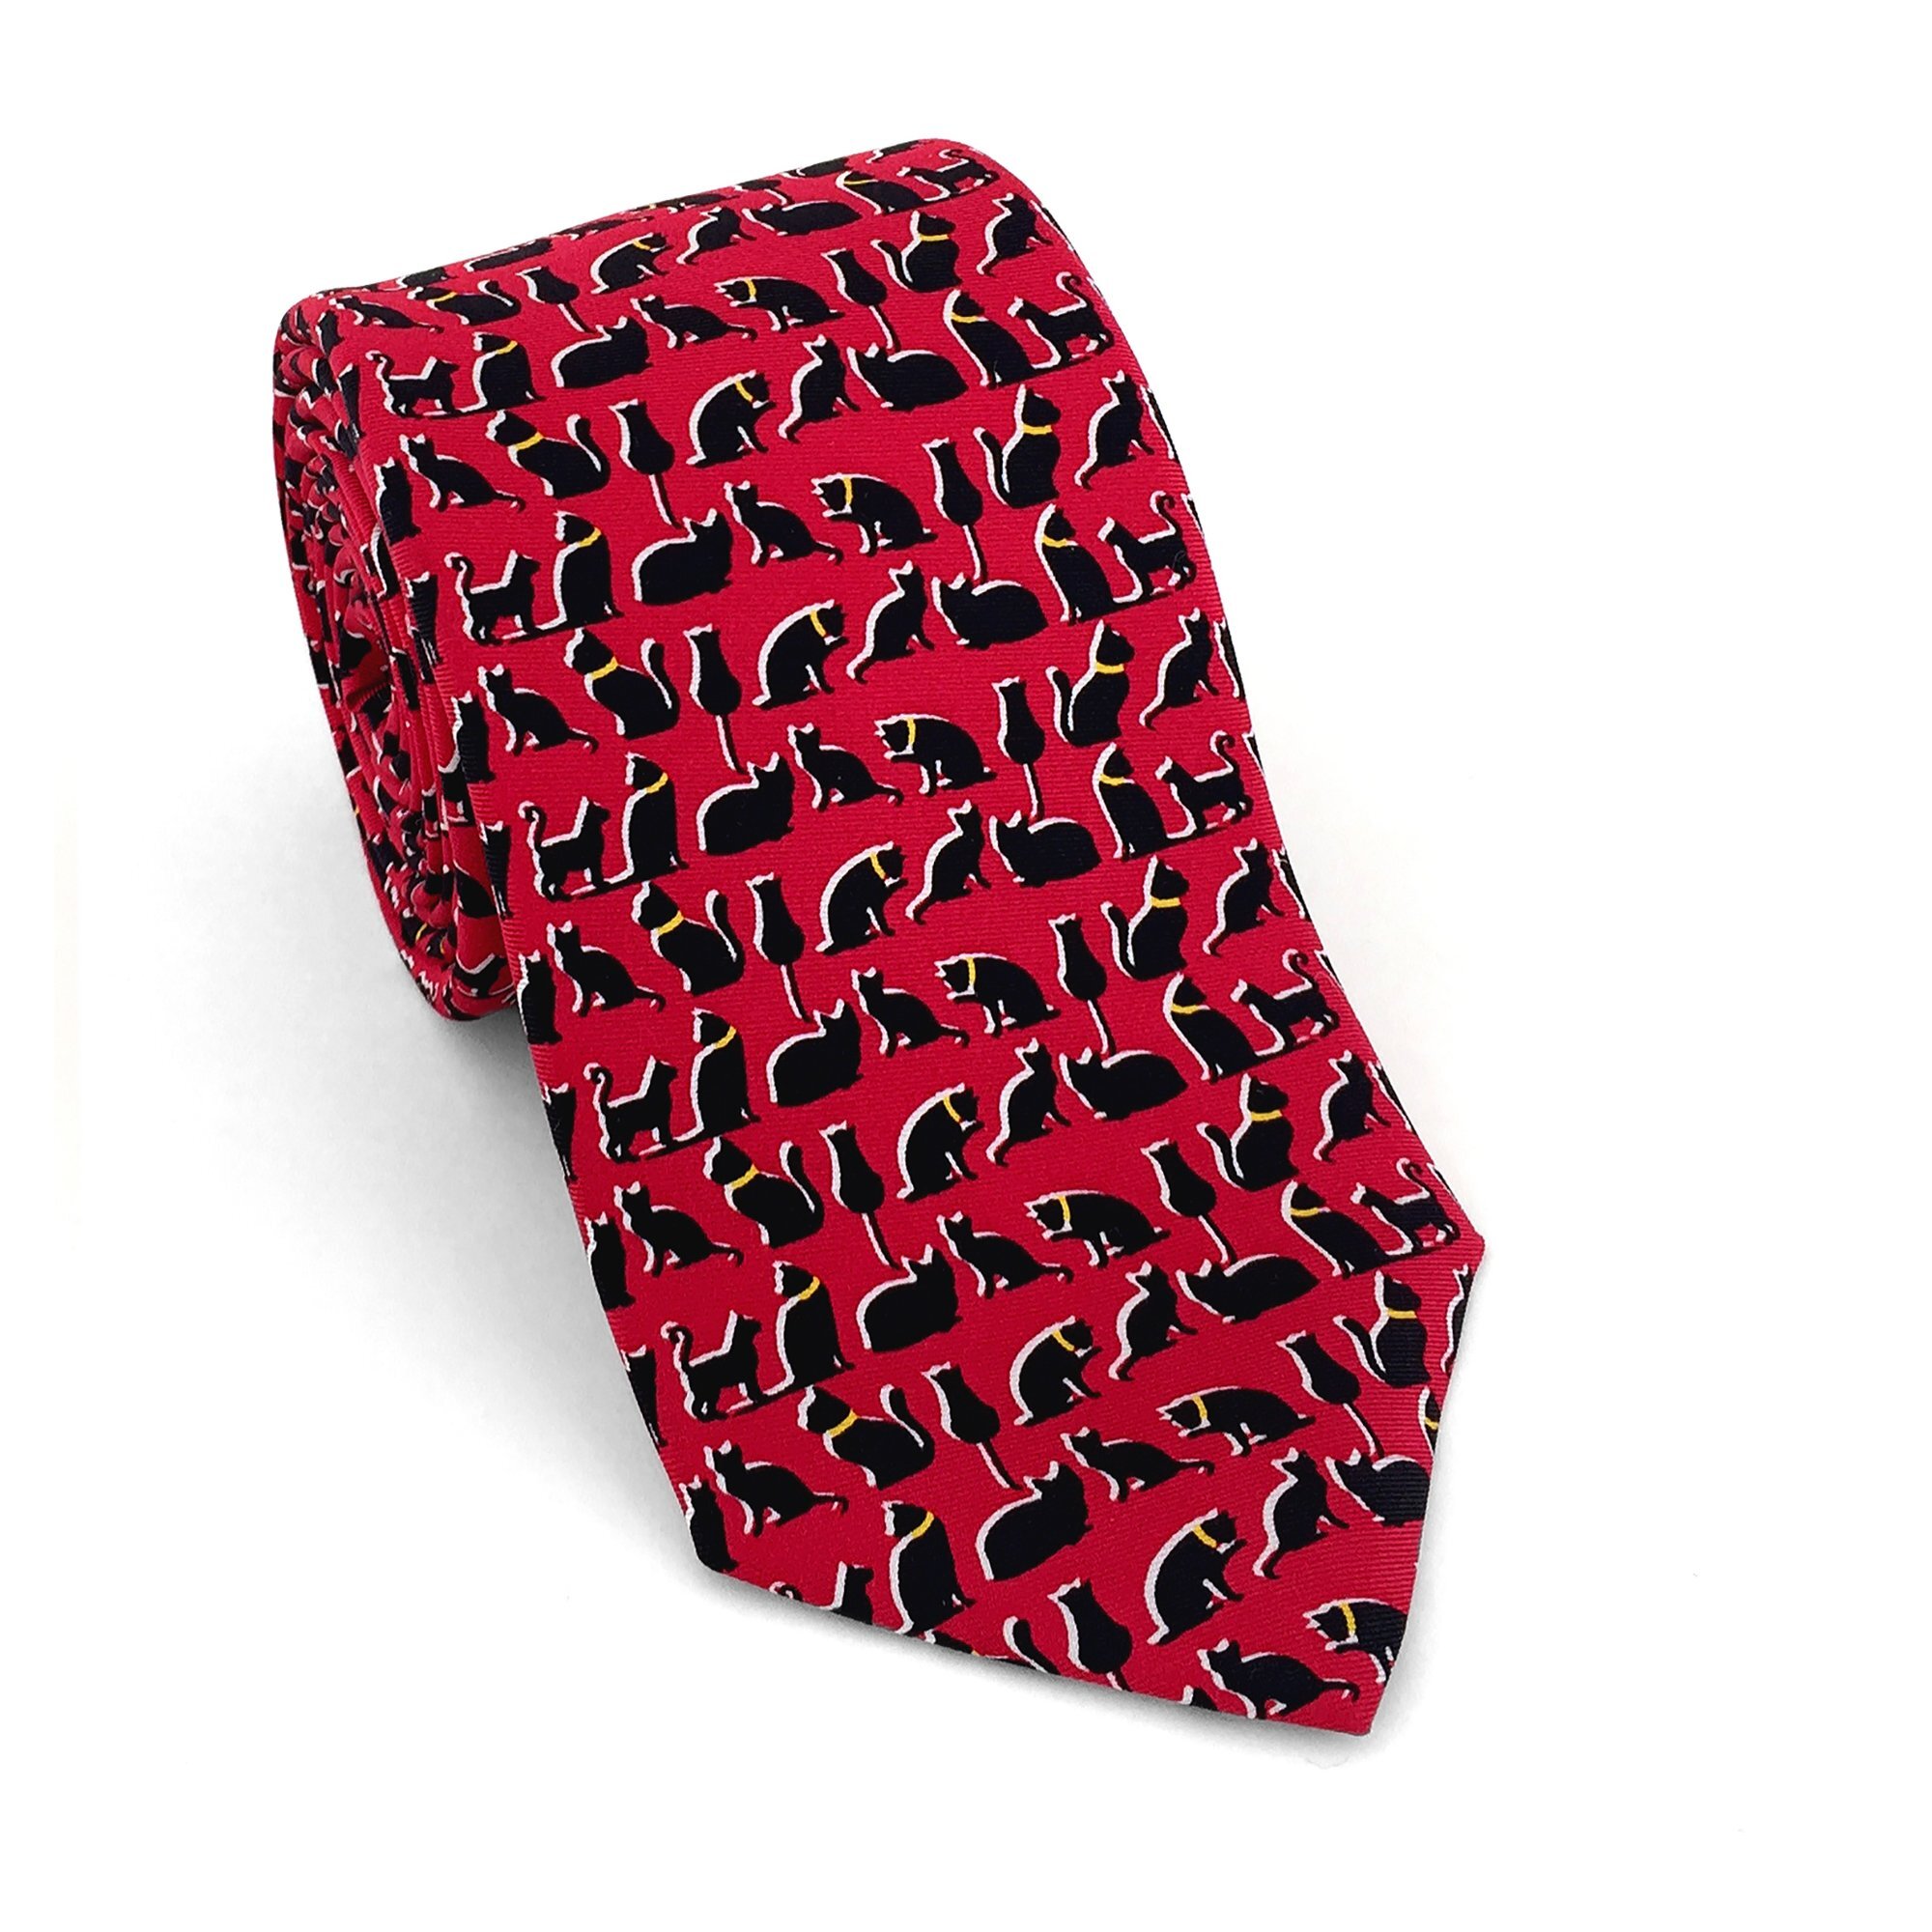 CATS_Necktie_from_Josh_Bach_Limited_large_-resize_2000x.jpg